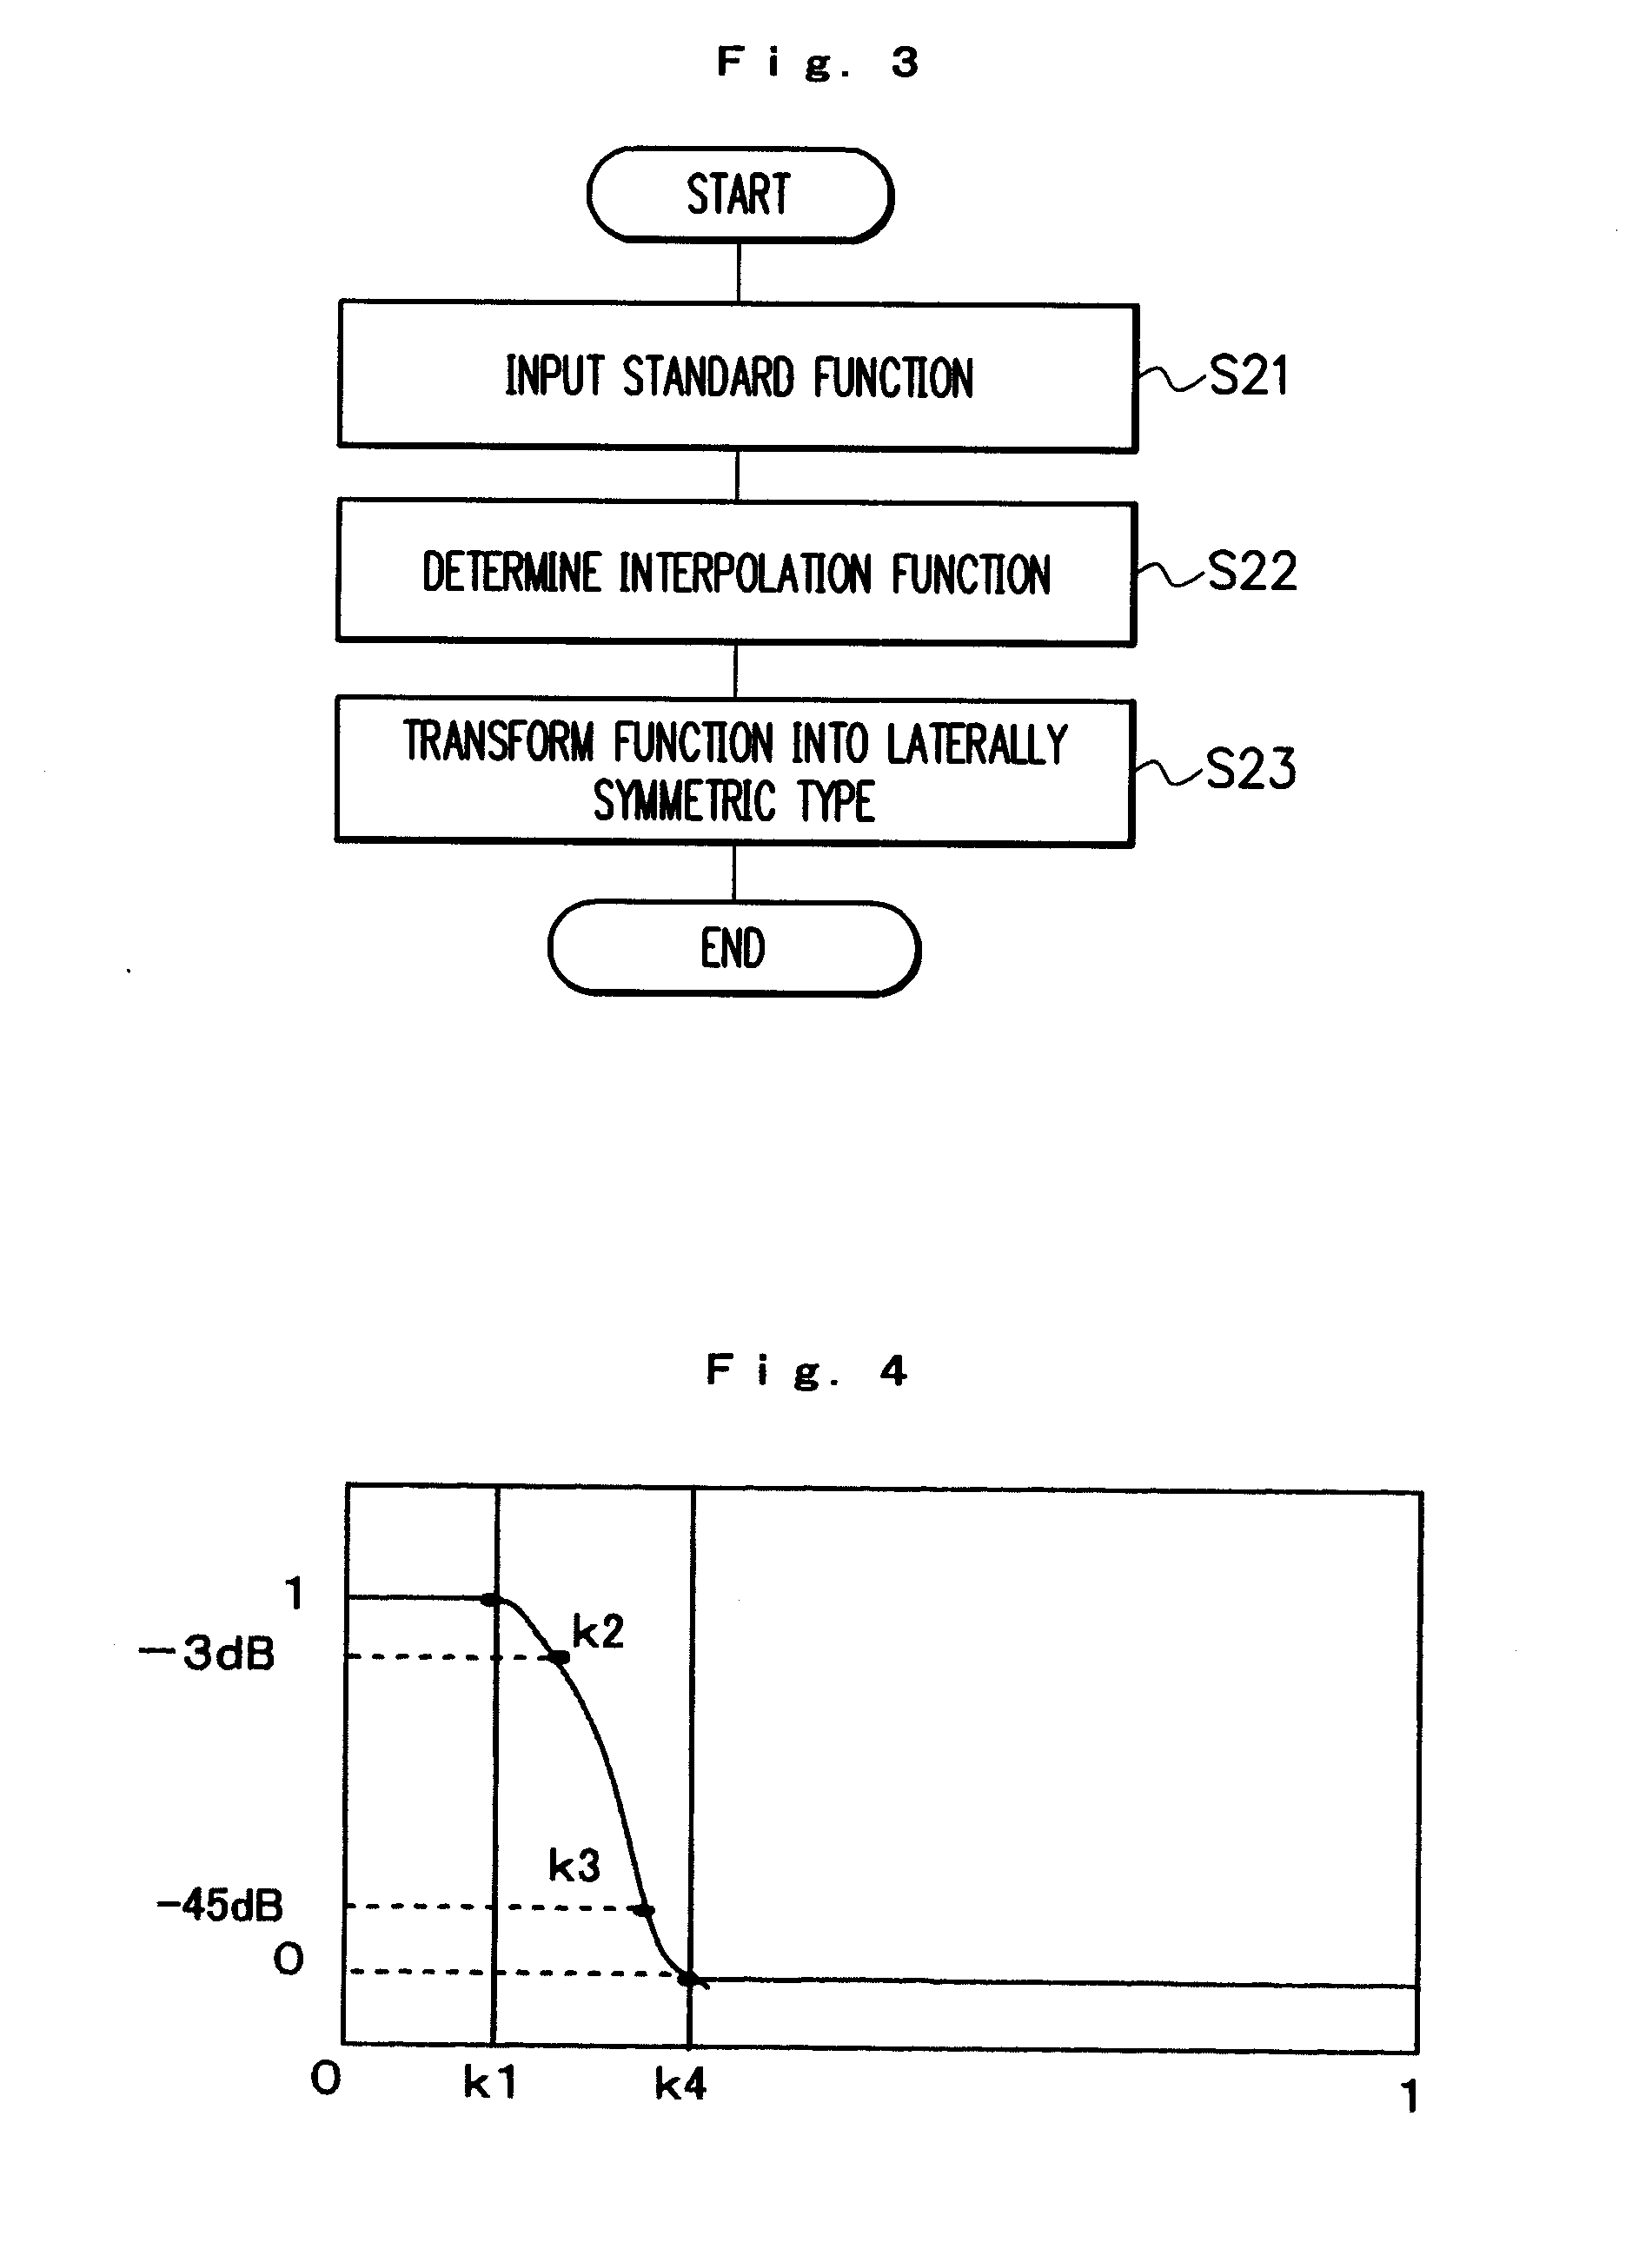 Methods, devices, and programs for designing a digital filter and for generating a numerical sequence of desired frequency characteristics